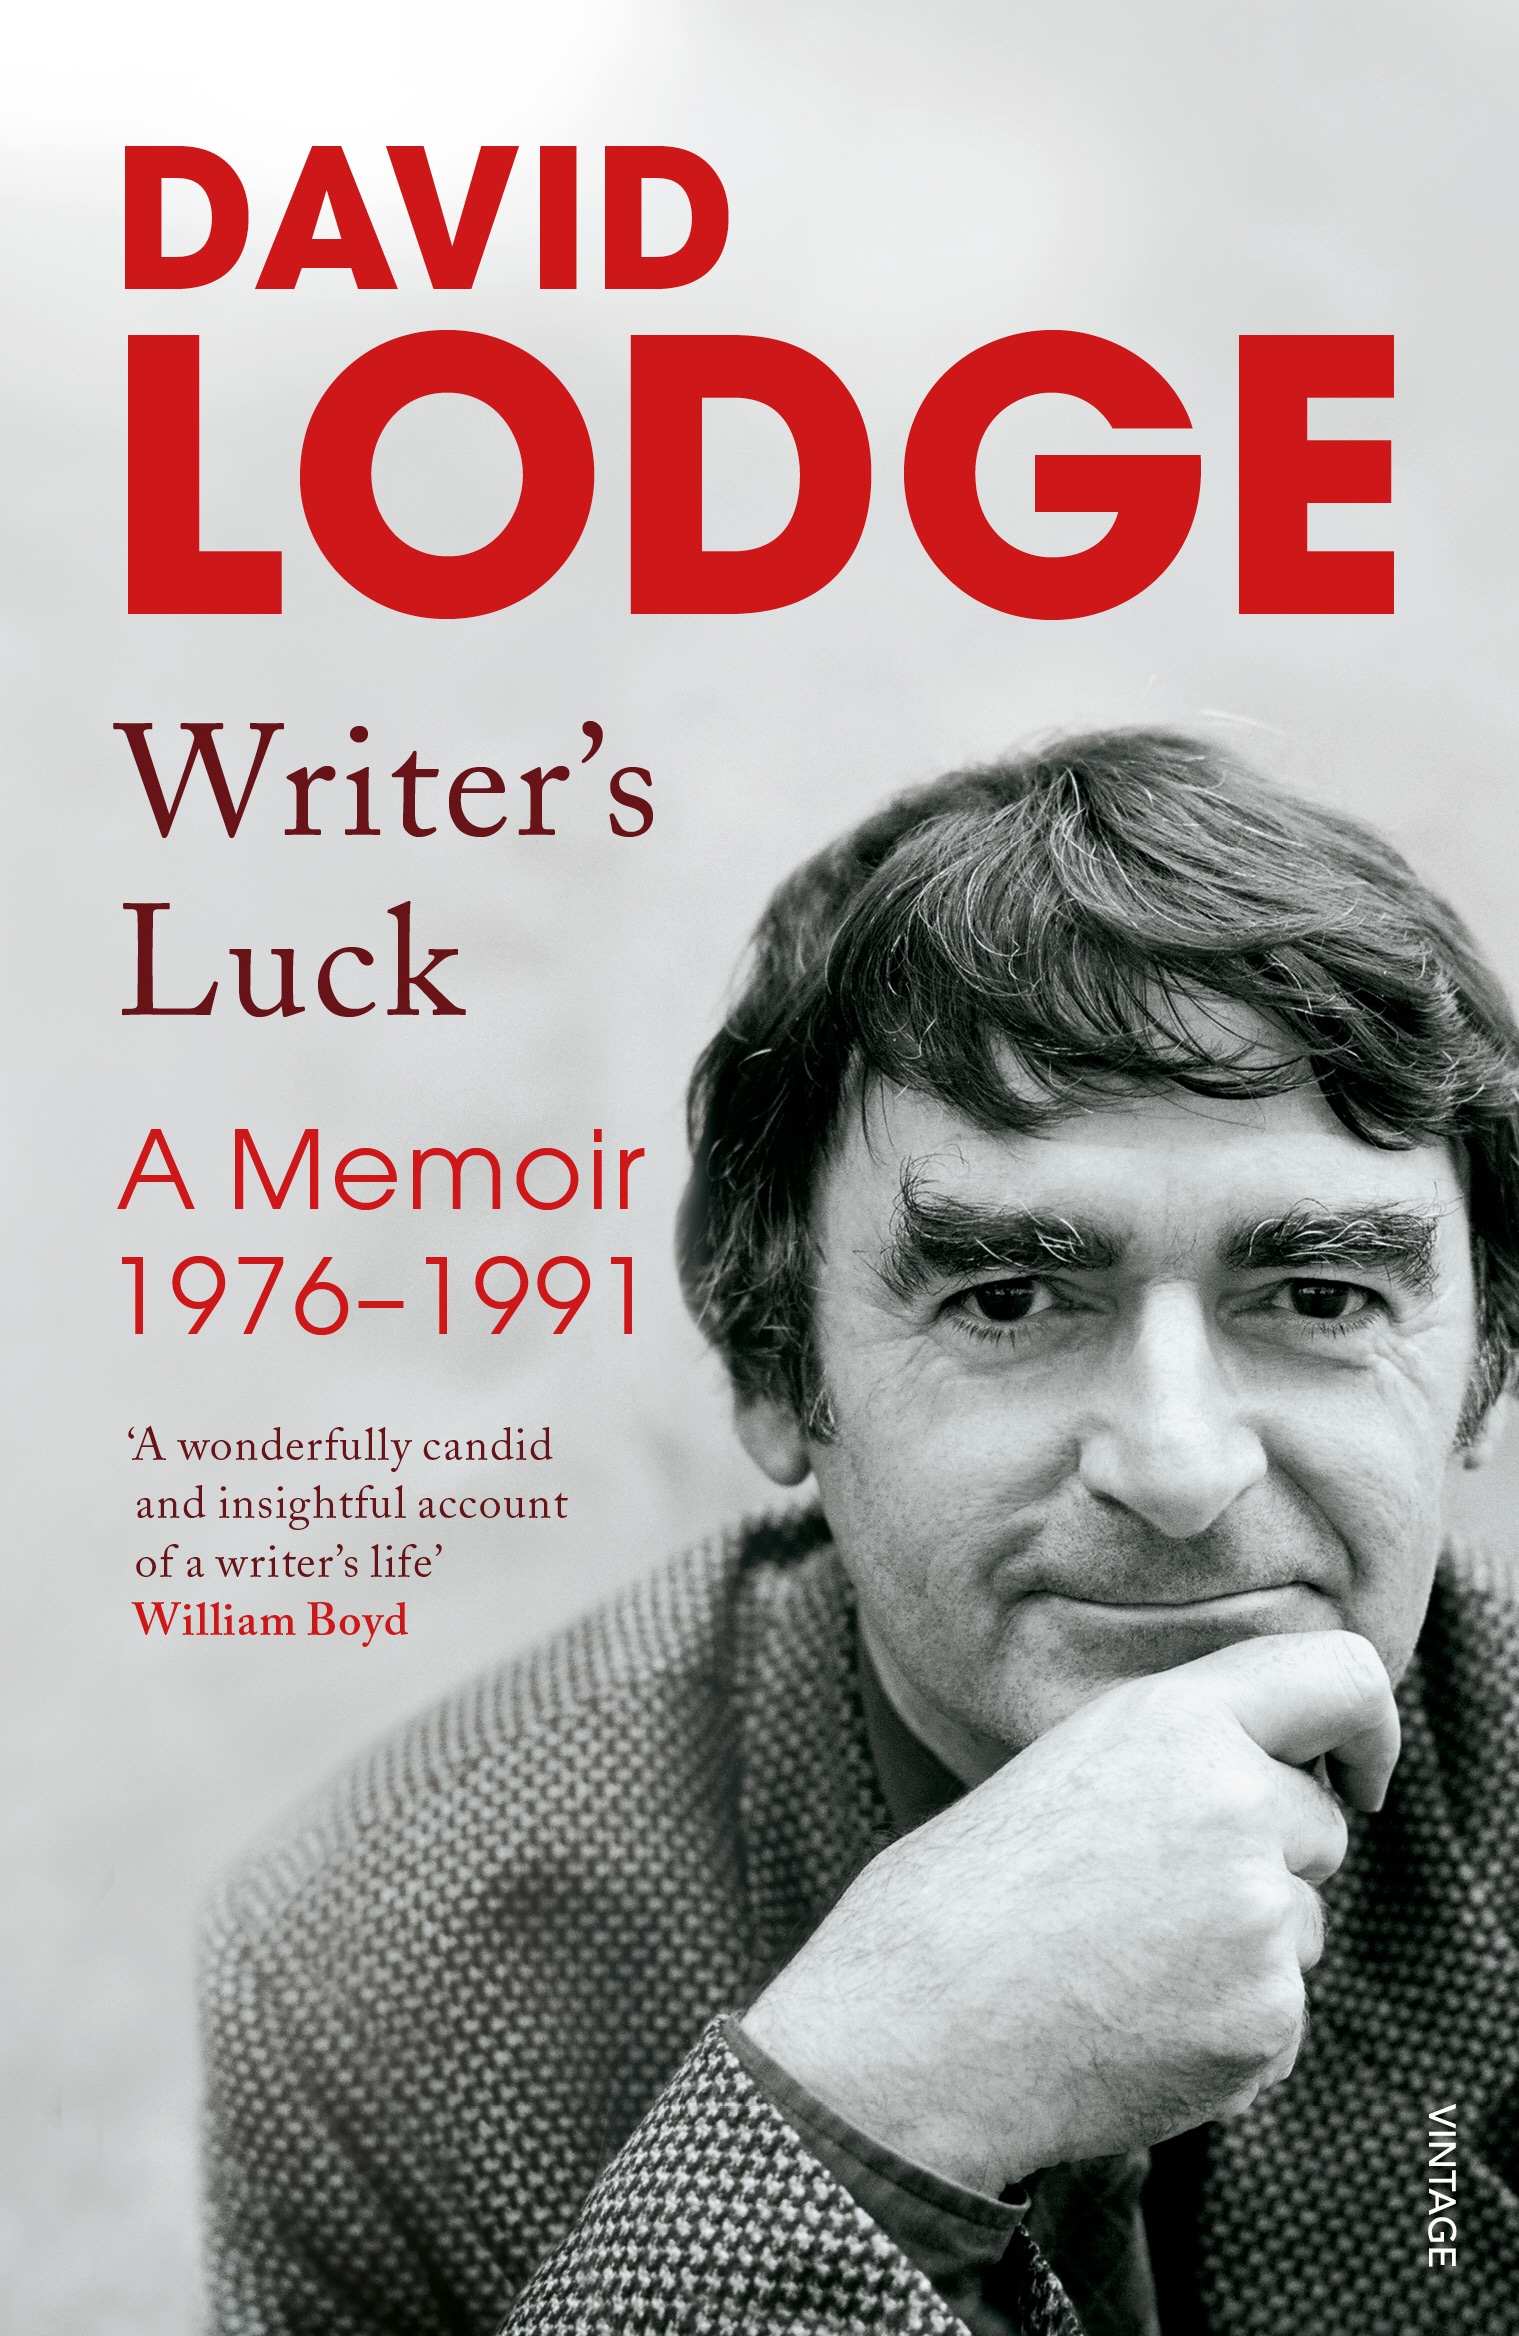 Book “Writer's Luck” by David Lodge — January 17, 2019